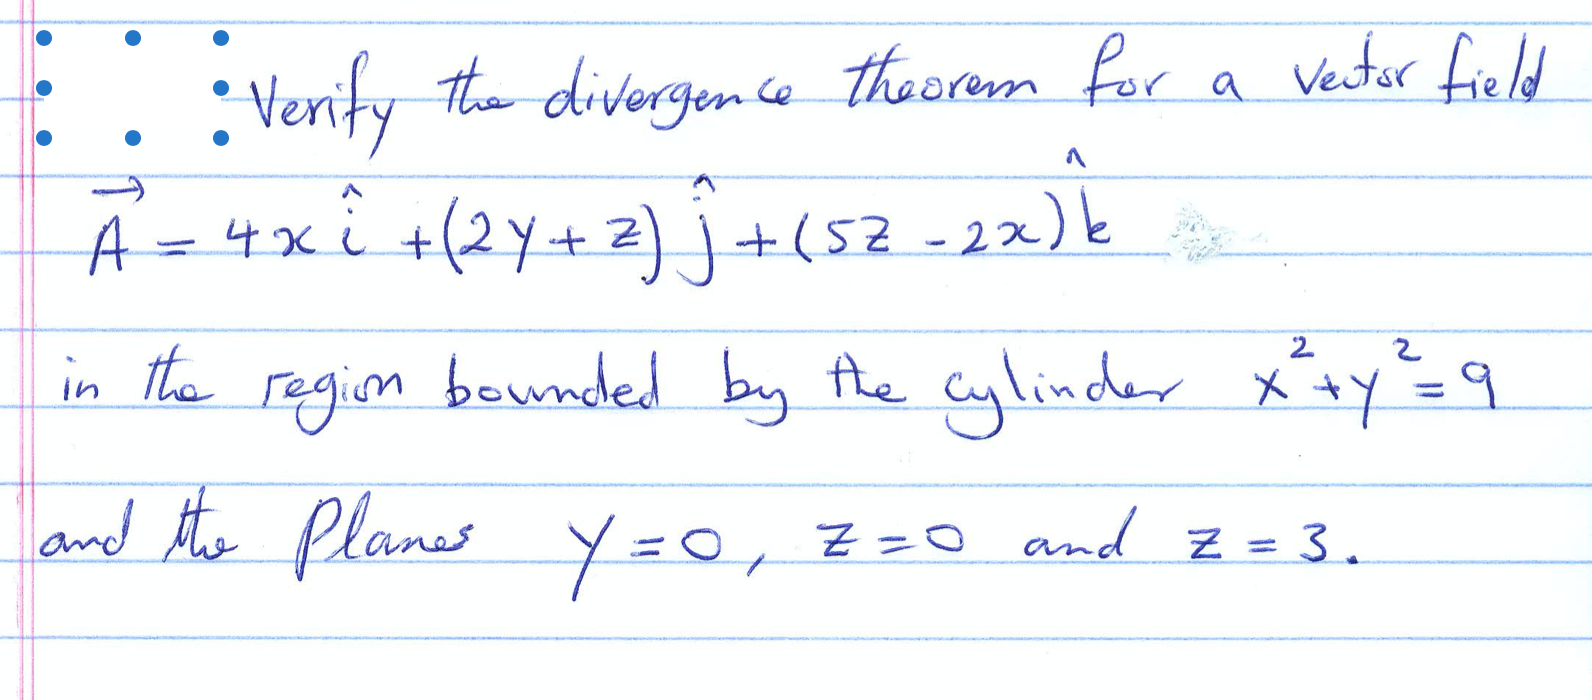 : Verify the divergence theorem for
A=4xi +(2Y+z
Vector field
) |
+(52-2x)k
in the regim beunded by he cylinder x+y=9
region
and the Planes Y=0, Z=0 and z = 3.
%3D
